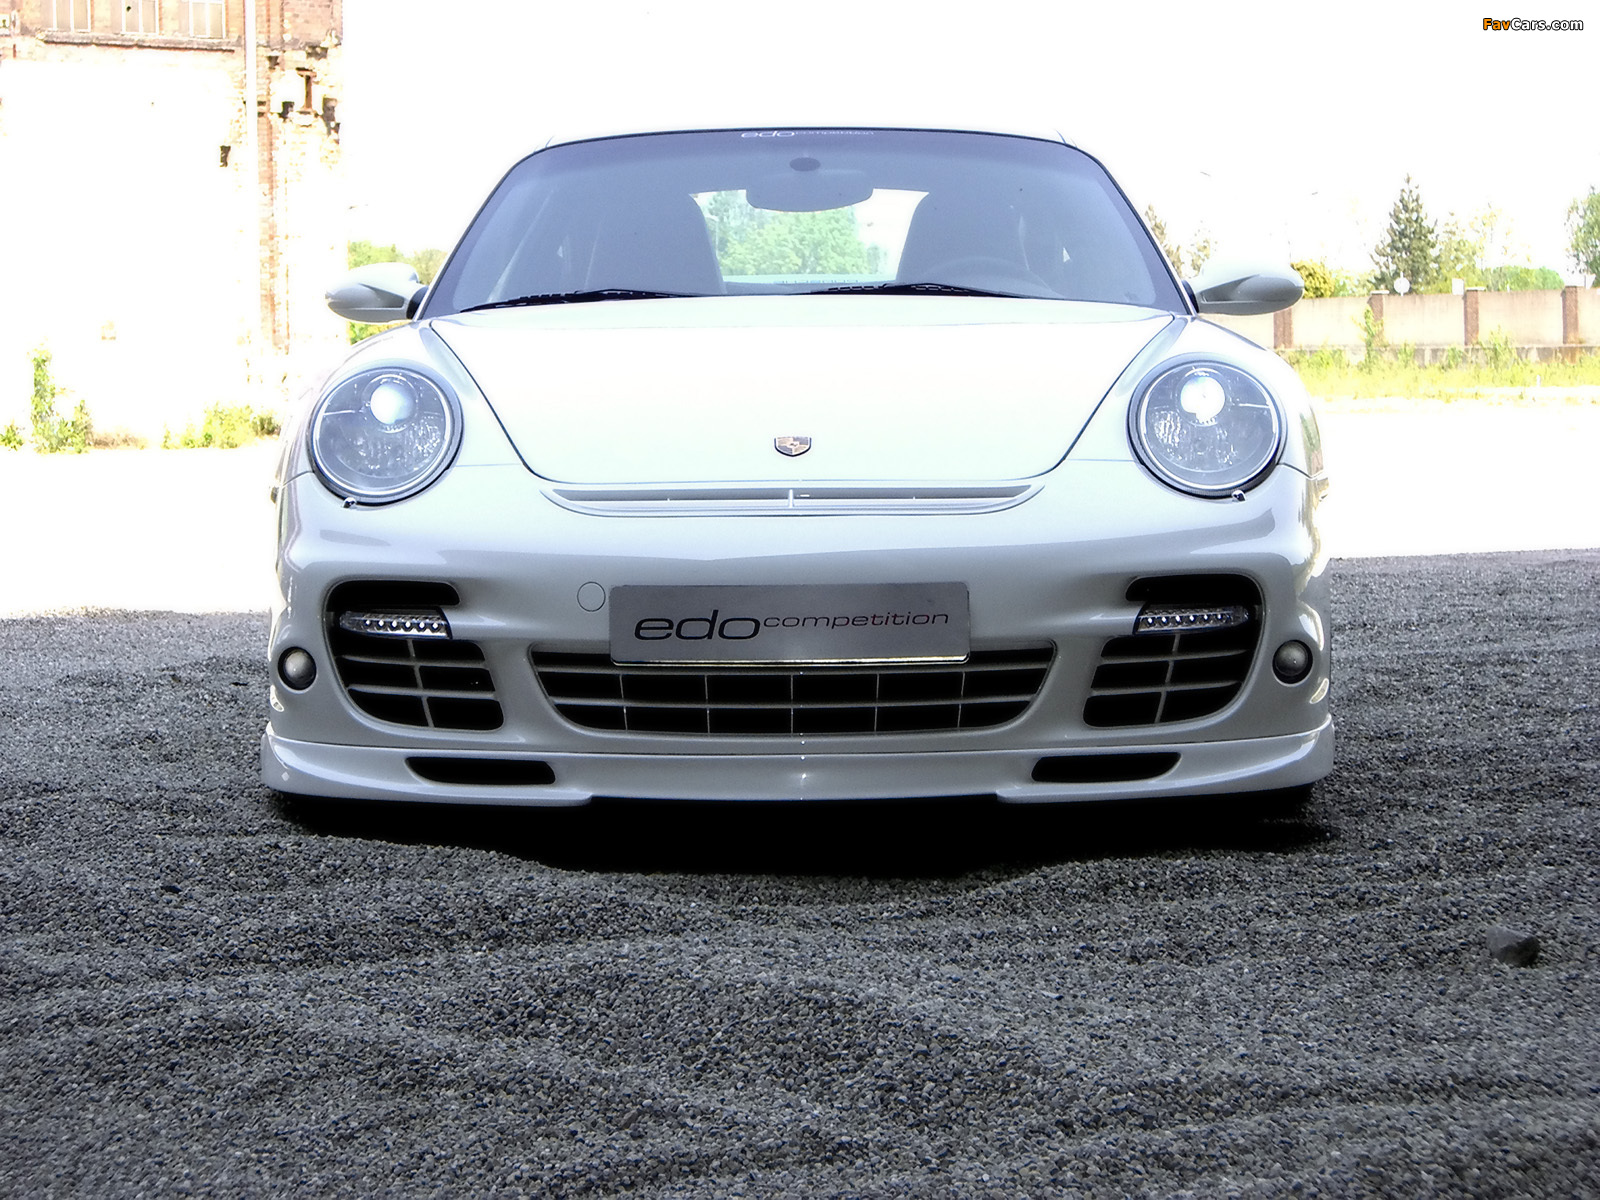 Pictures of Edo Competition Porsche 911 Turbo Shark (997) 2007 (1600 x 1200)